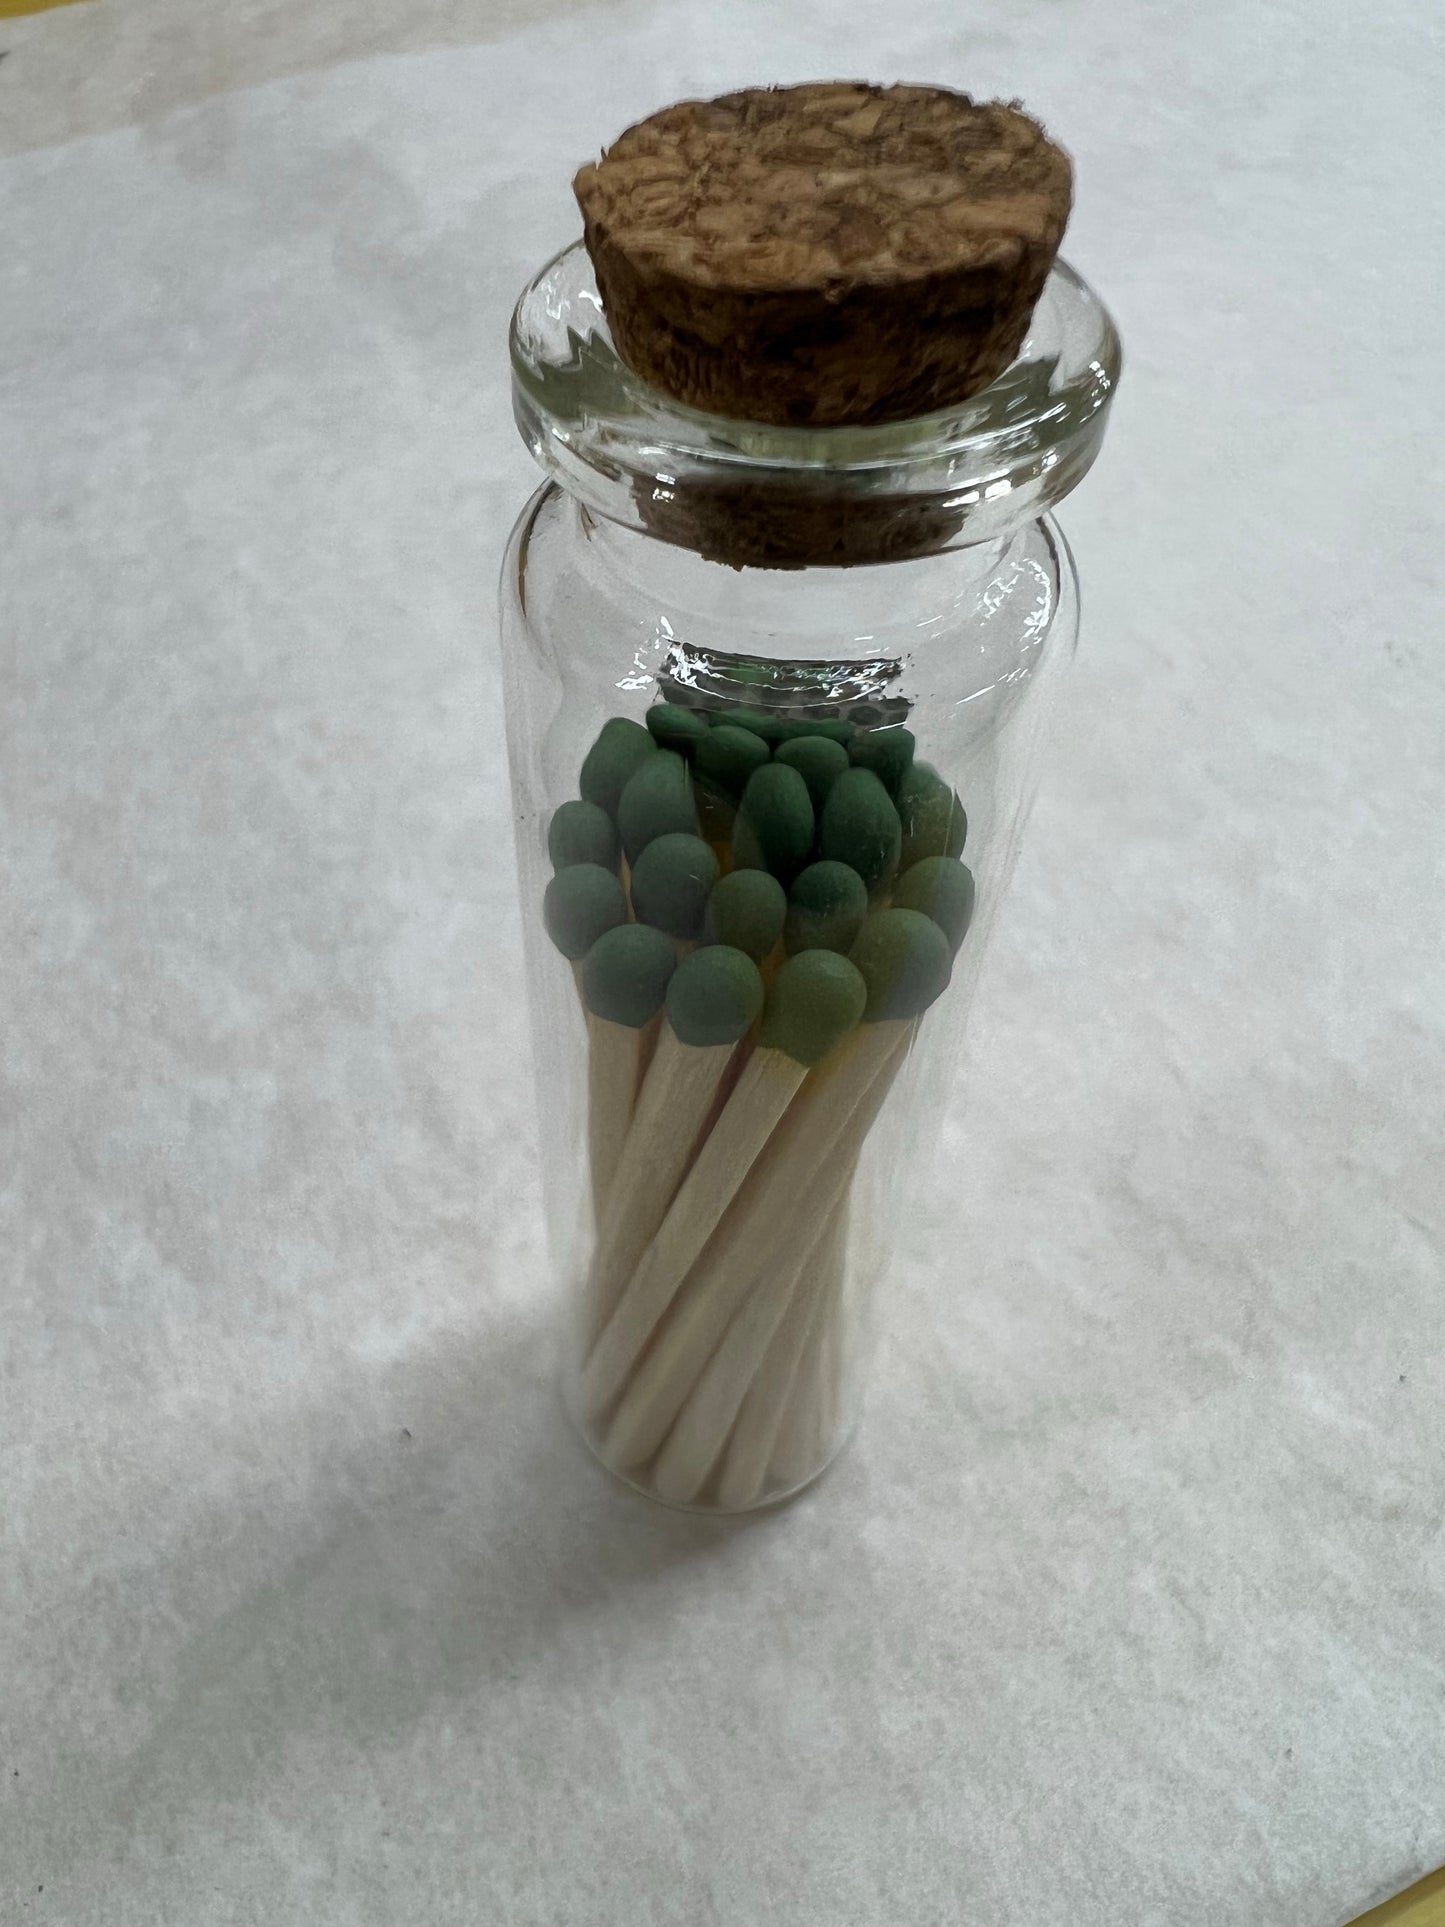 Apothecary Jar Wooden Matches (No Logo on Jar - RTL - Private Label)